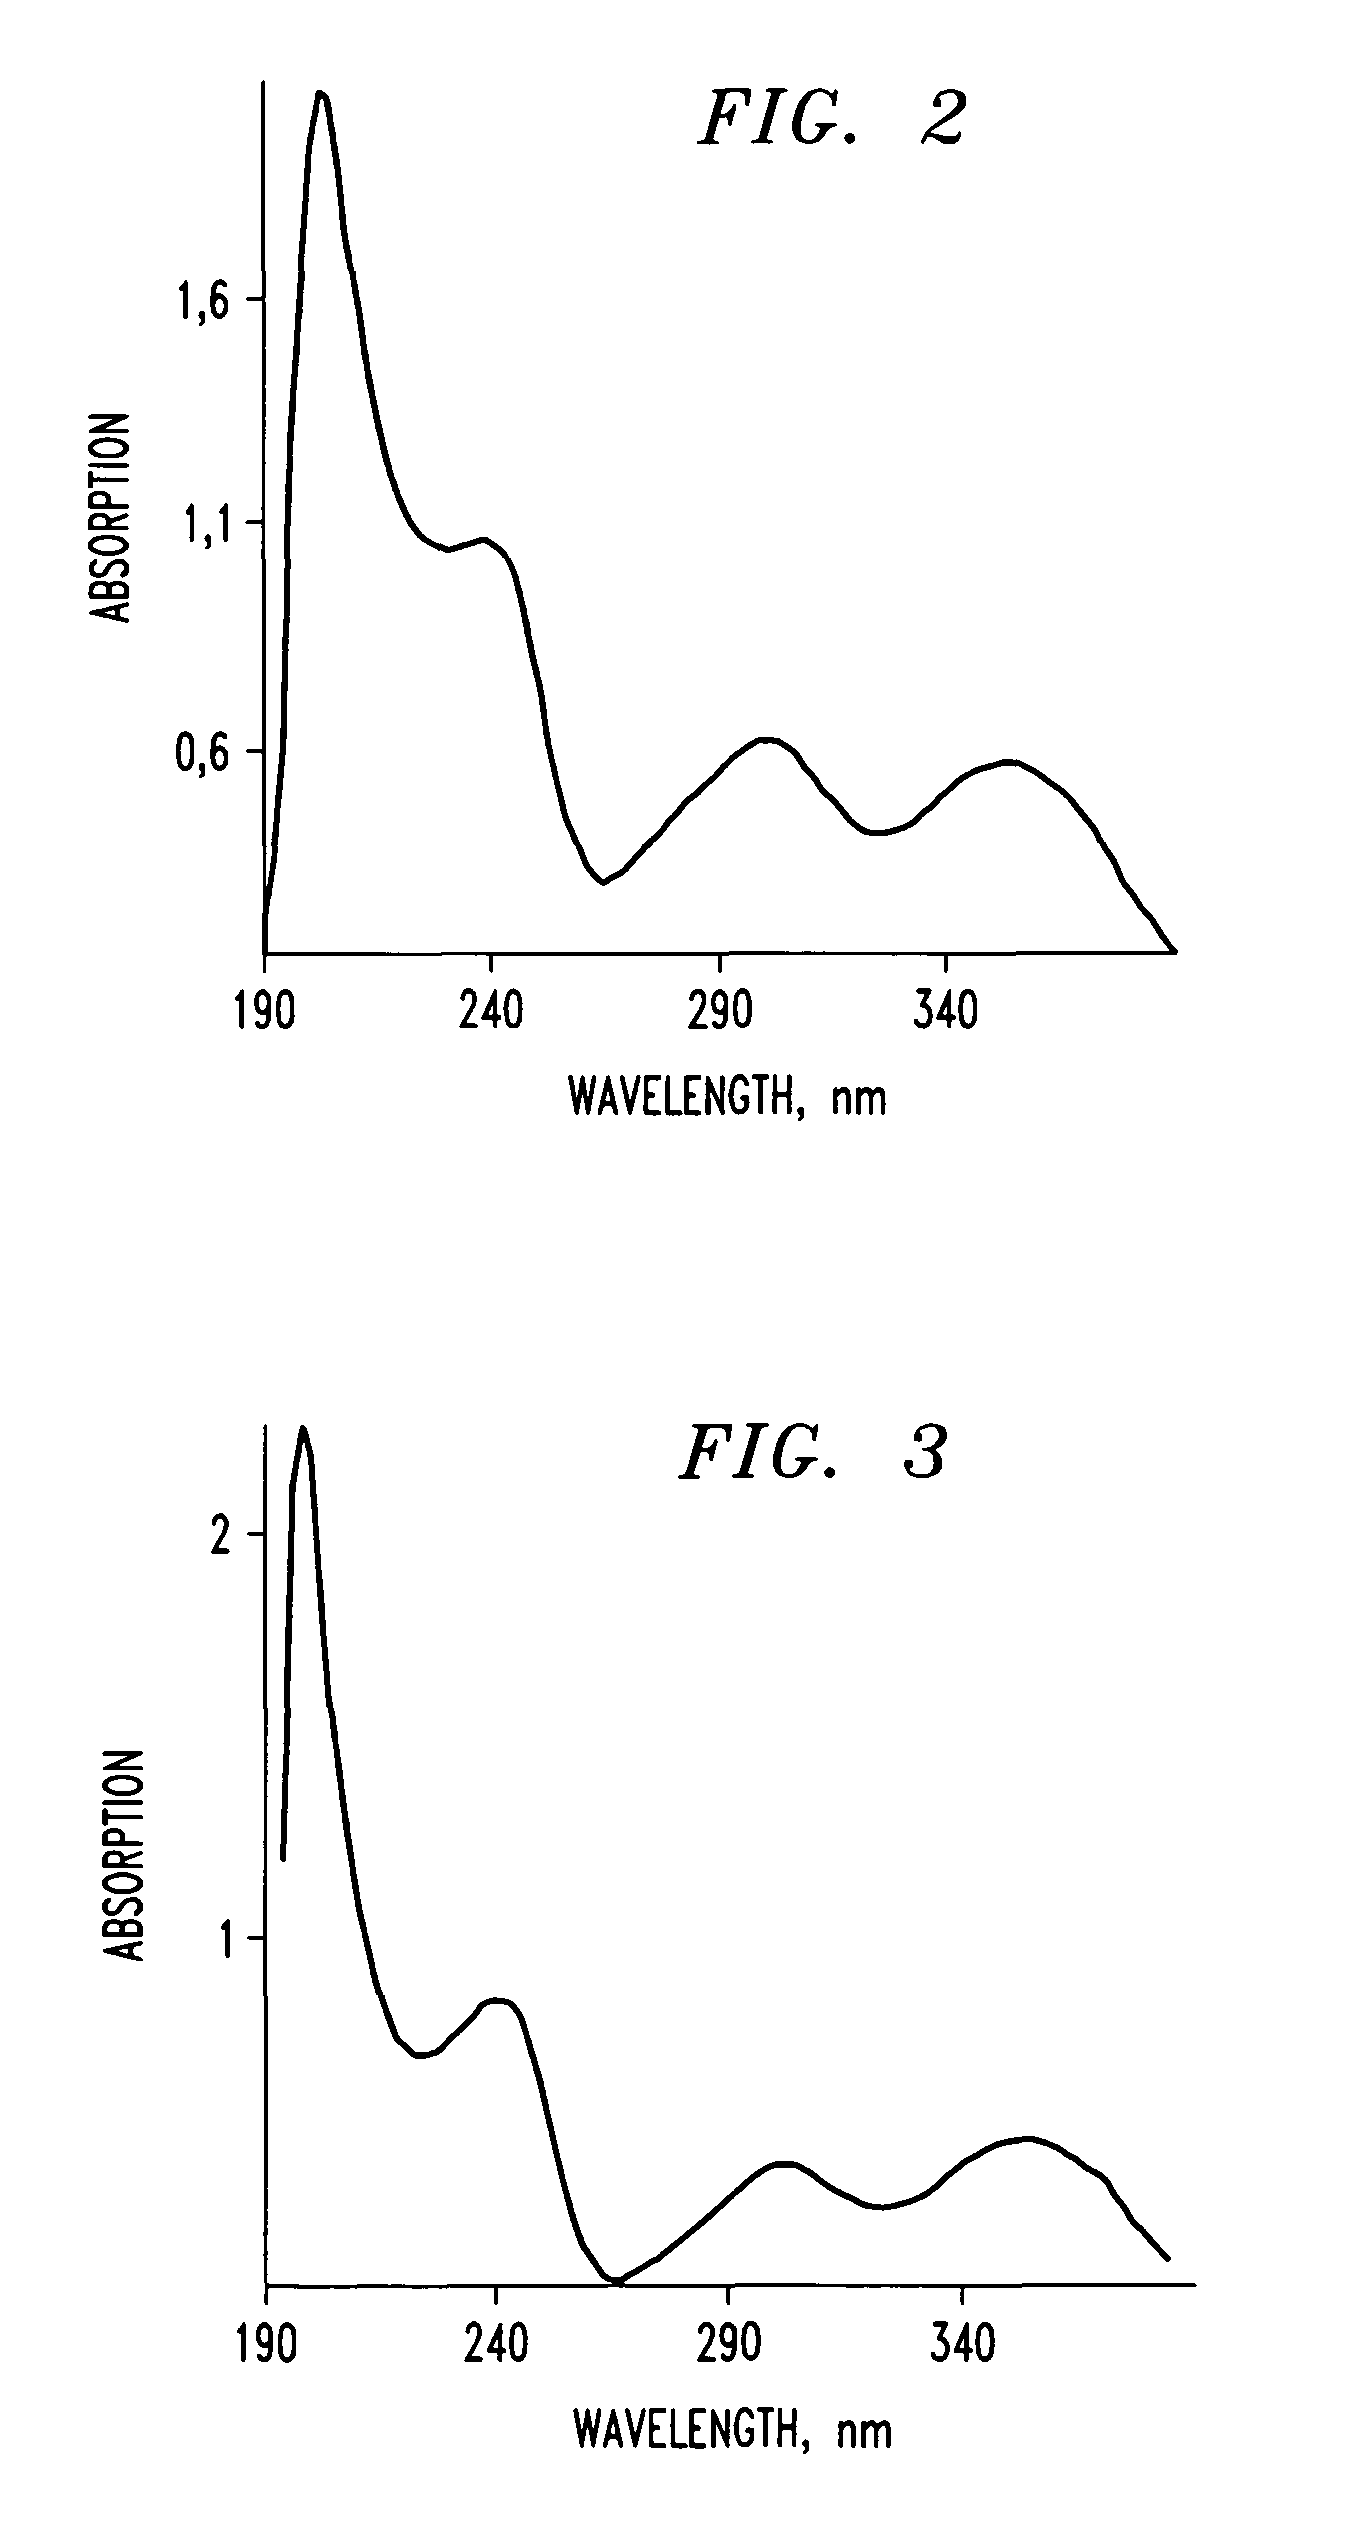 Diversion- and/or abuse-resistant compositions and methods for making the same